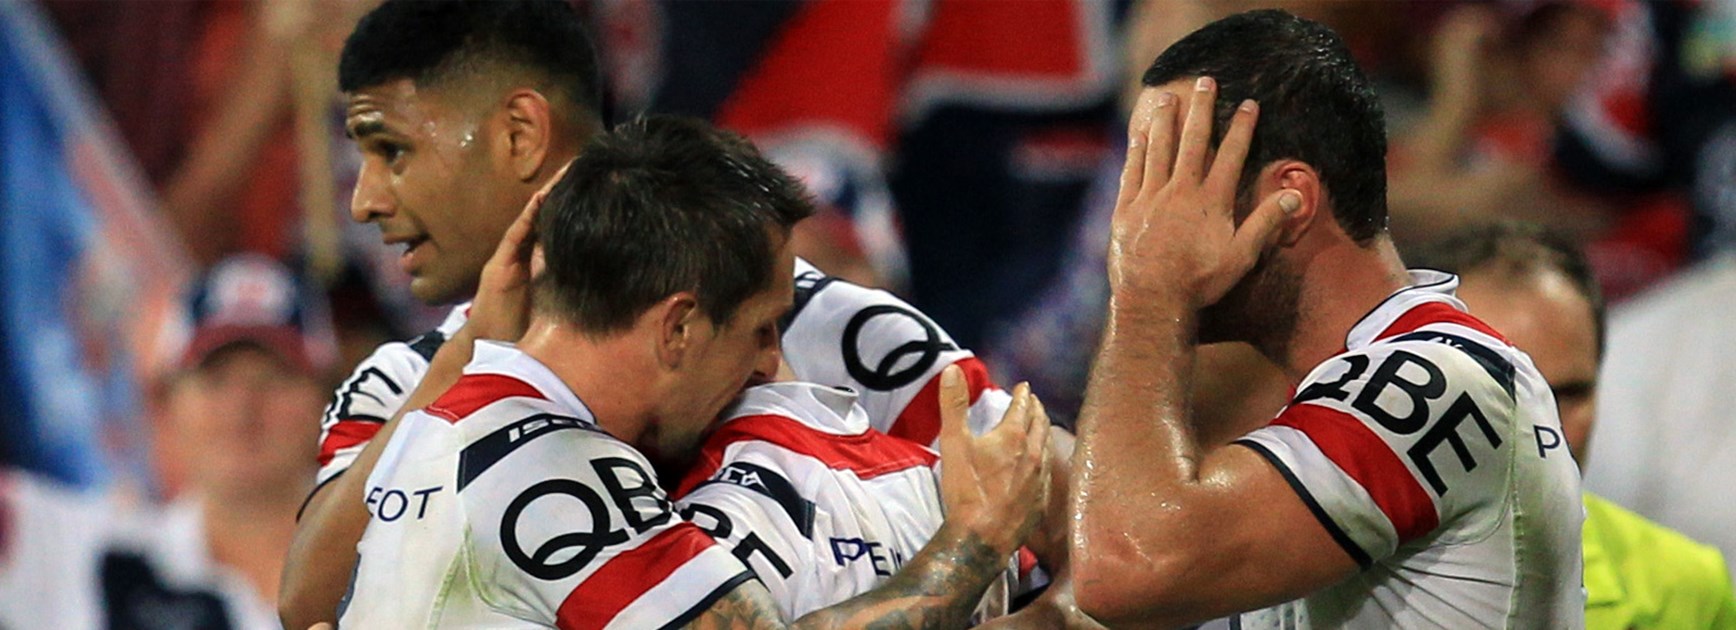 NSW Blues Mitchell Pearce and Boyd Cordner returned to the winners circle with the Sydney Roosters in Penrith on Saturday.